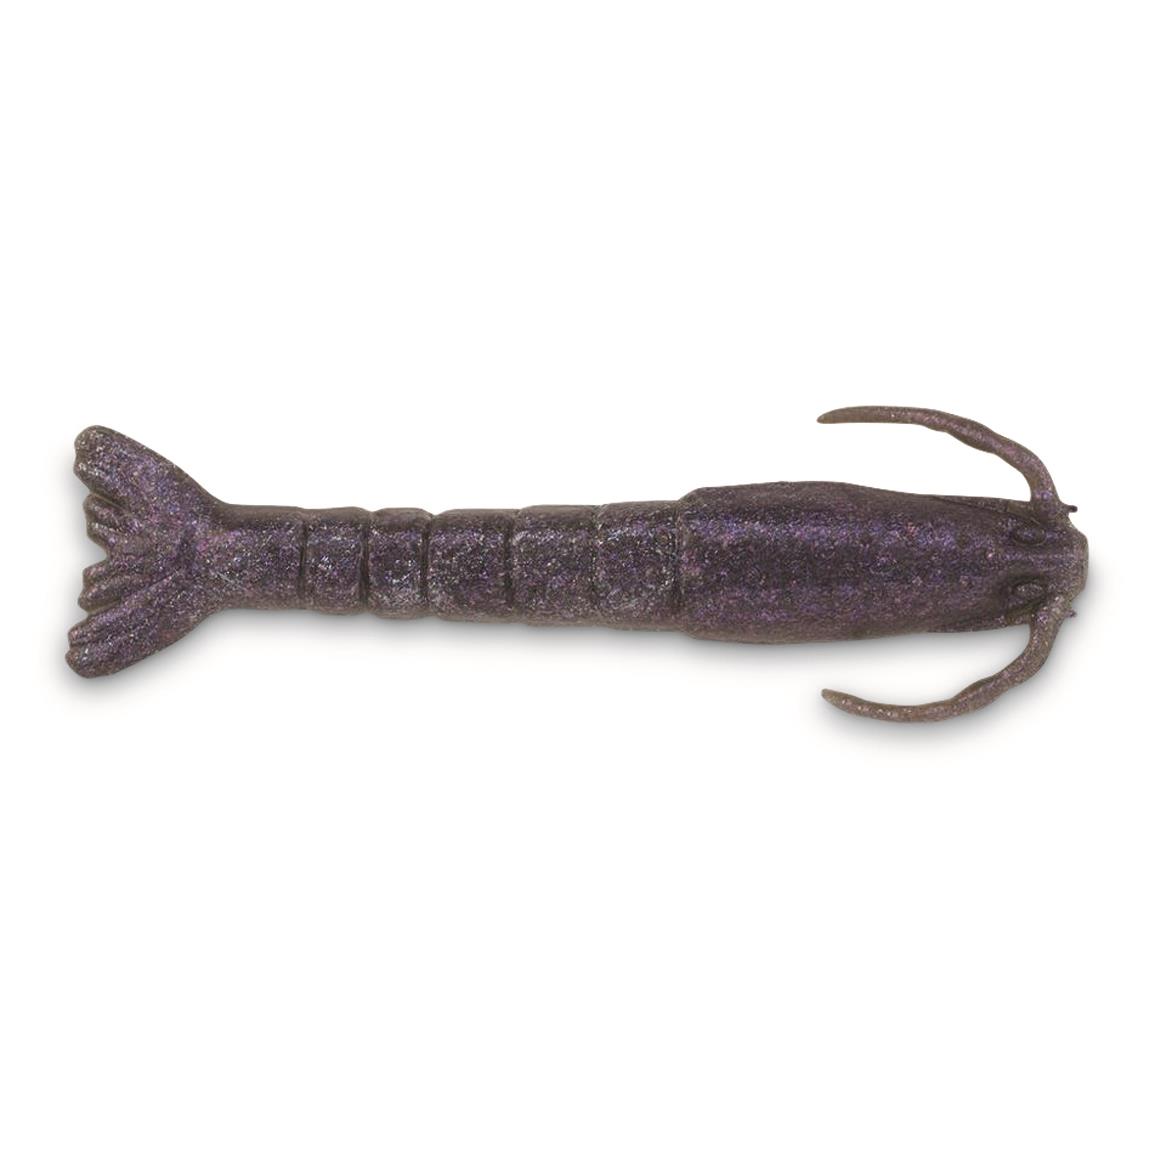 Northland Eye-Candy 3 Grub, 5 Pack - 736644, Soft Baits at Sportsman's  Guide